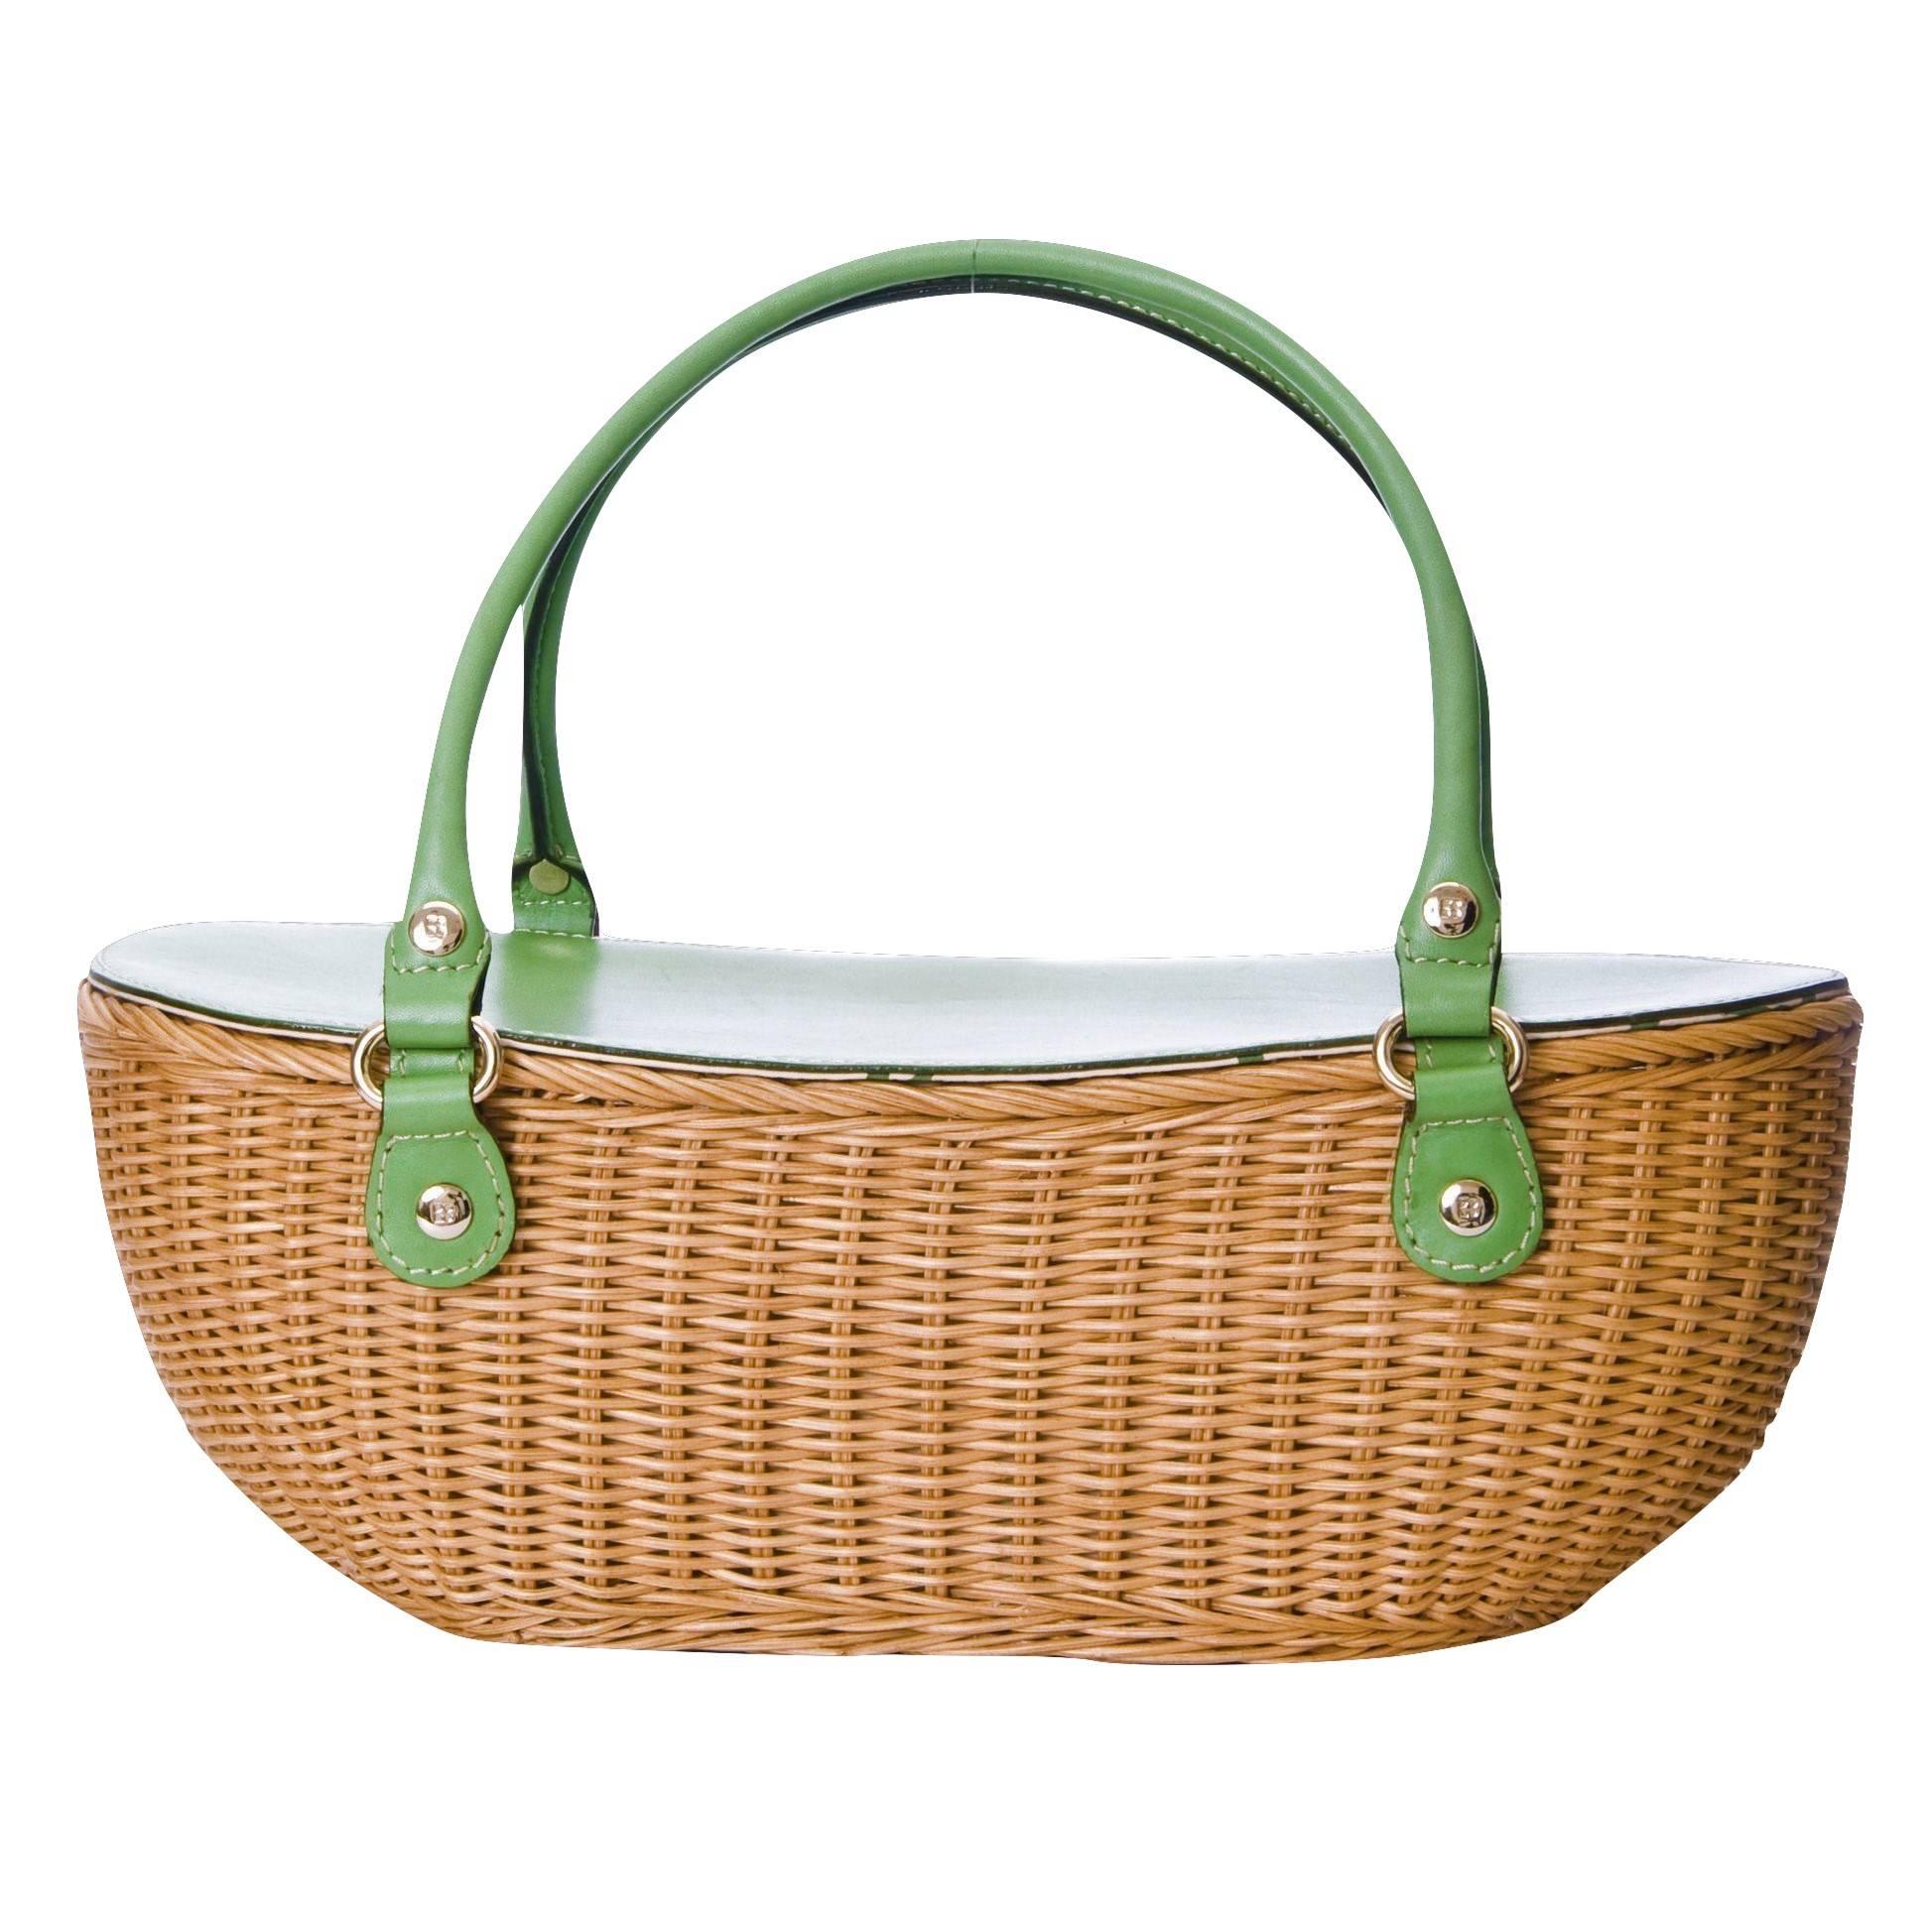 New Kate Spade Her Rare Large Collectible Spring 2005 Green Wicker Basket Bag  6